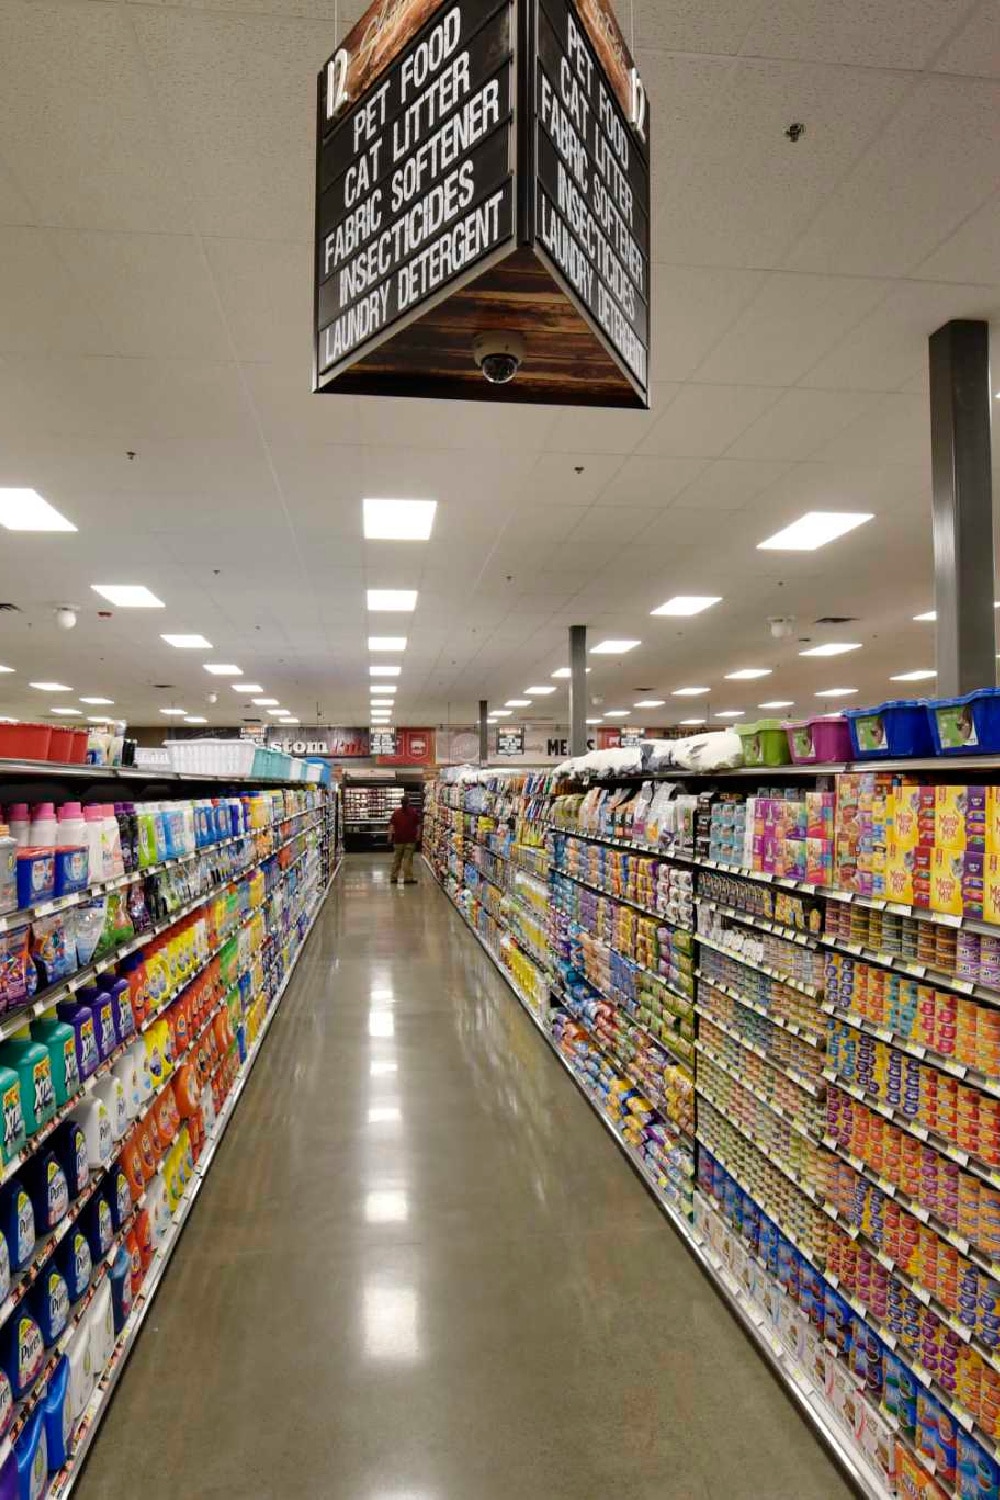 ShopRite stores quickly emptying – but what are the status of its